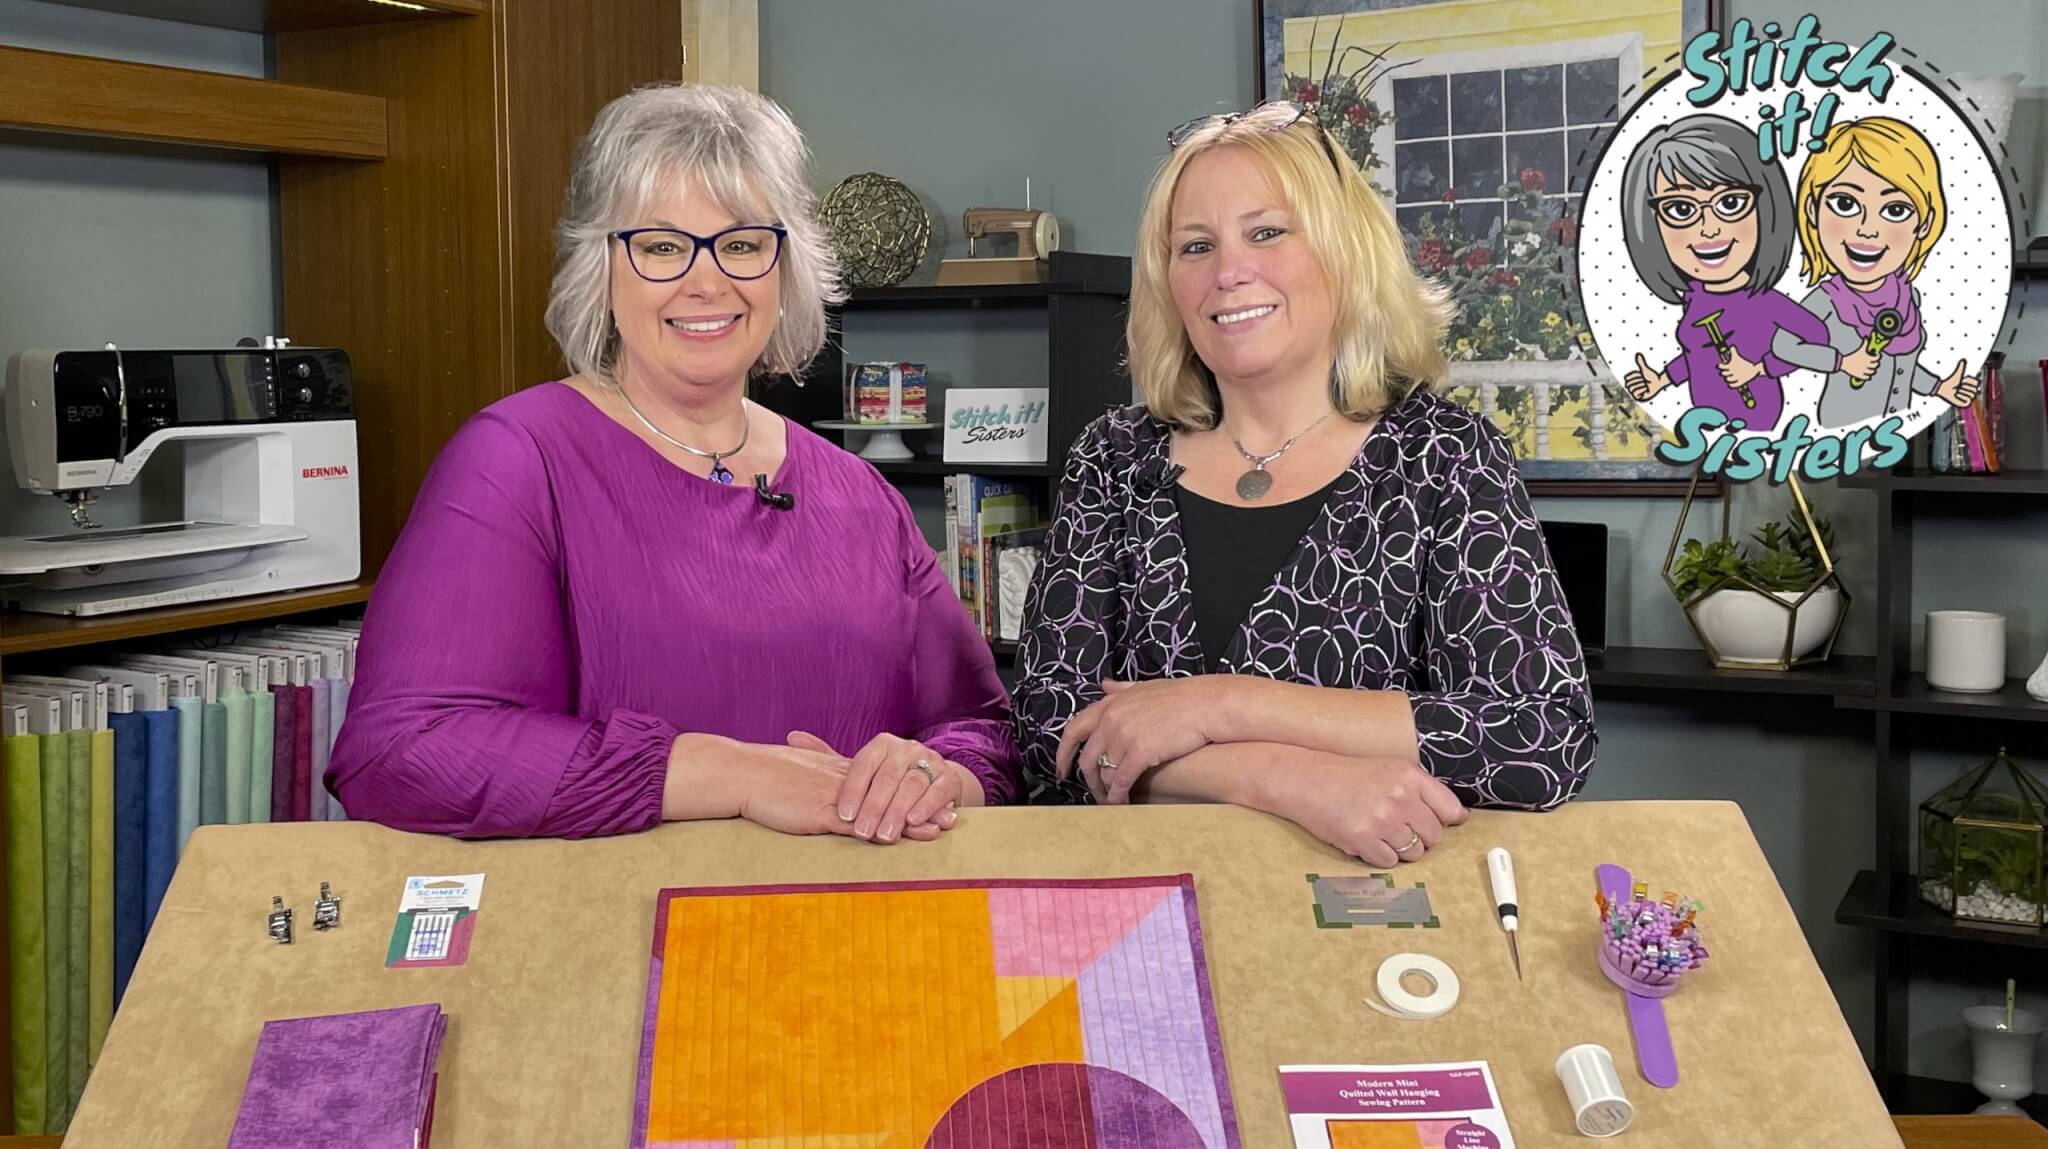 Stitch it! Sisters NEW! Absolute Easiest Way to Sew Quilt Binding Tutorial by the Stitch it! Sisters at Nancy Zieman Productions